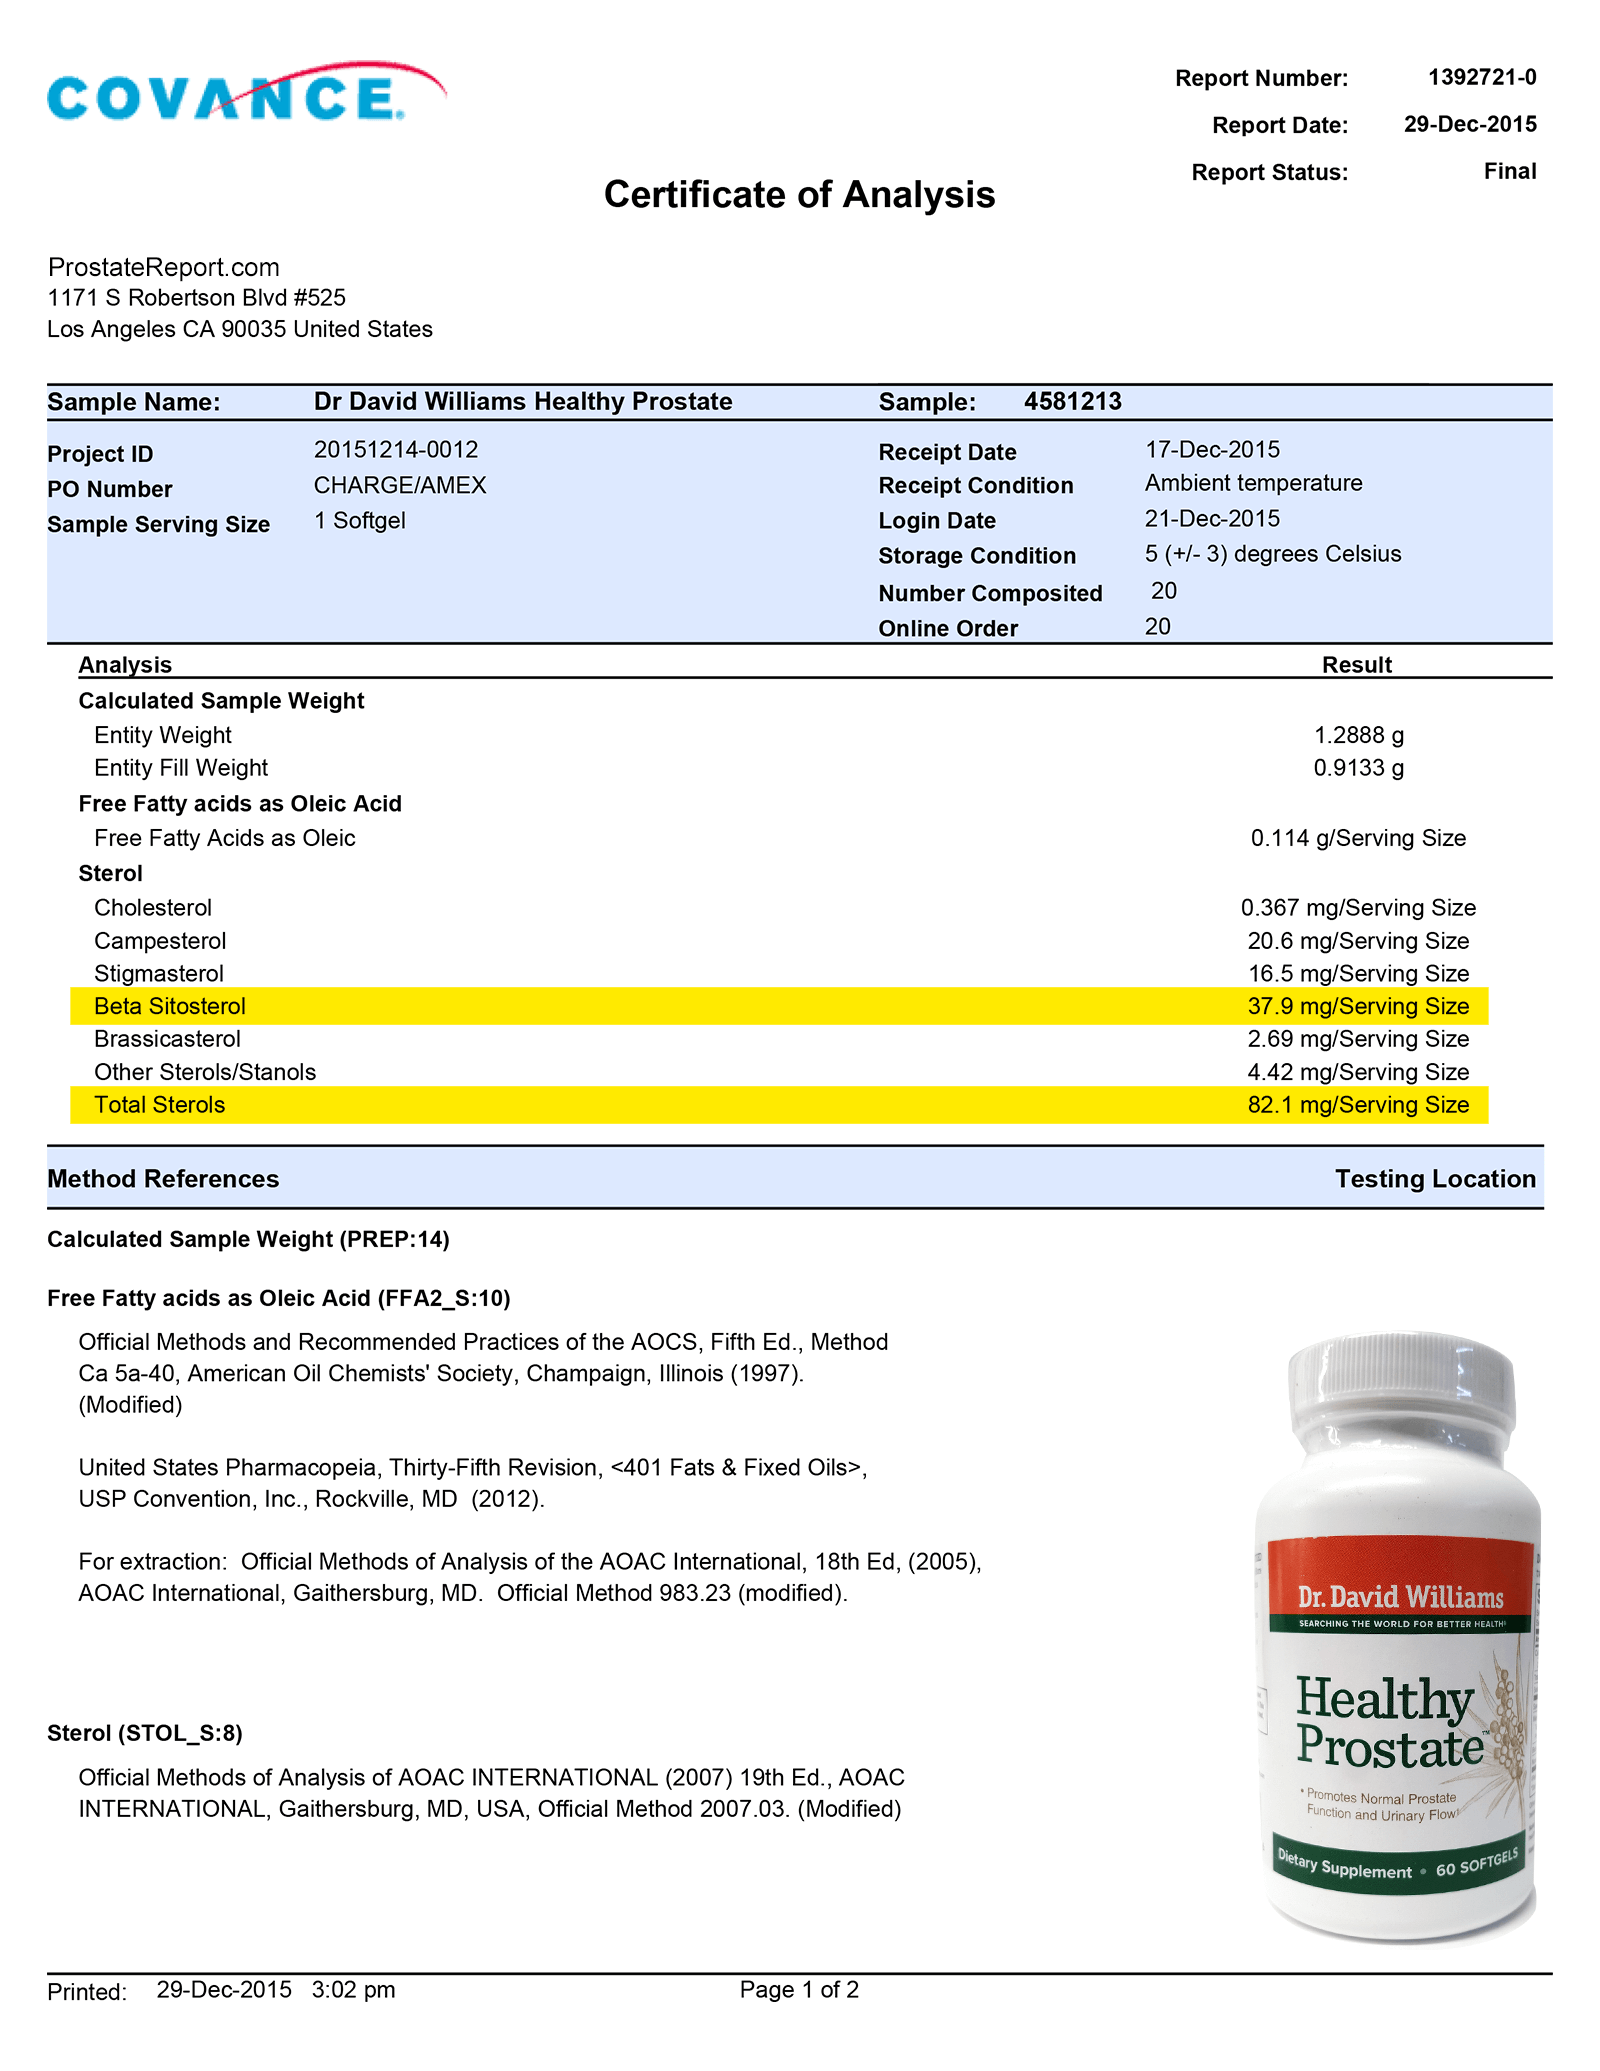 Healthy Prostate lab report 